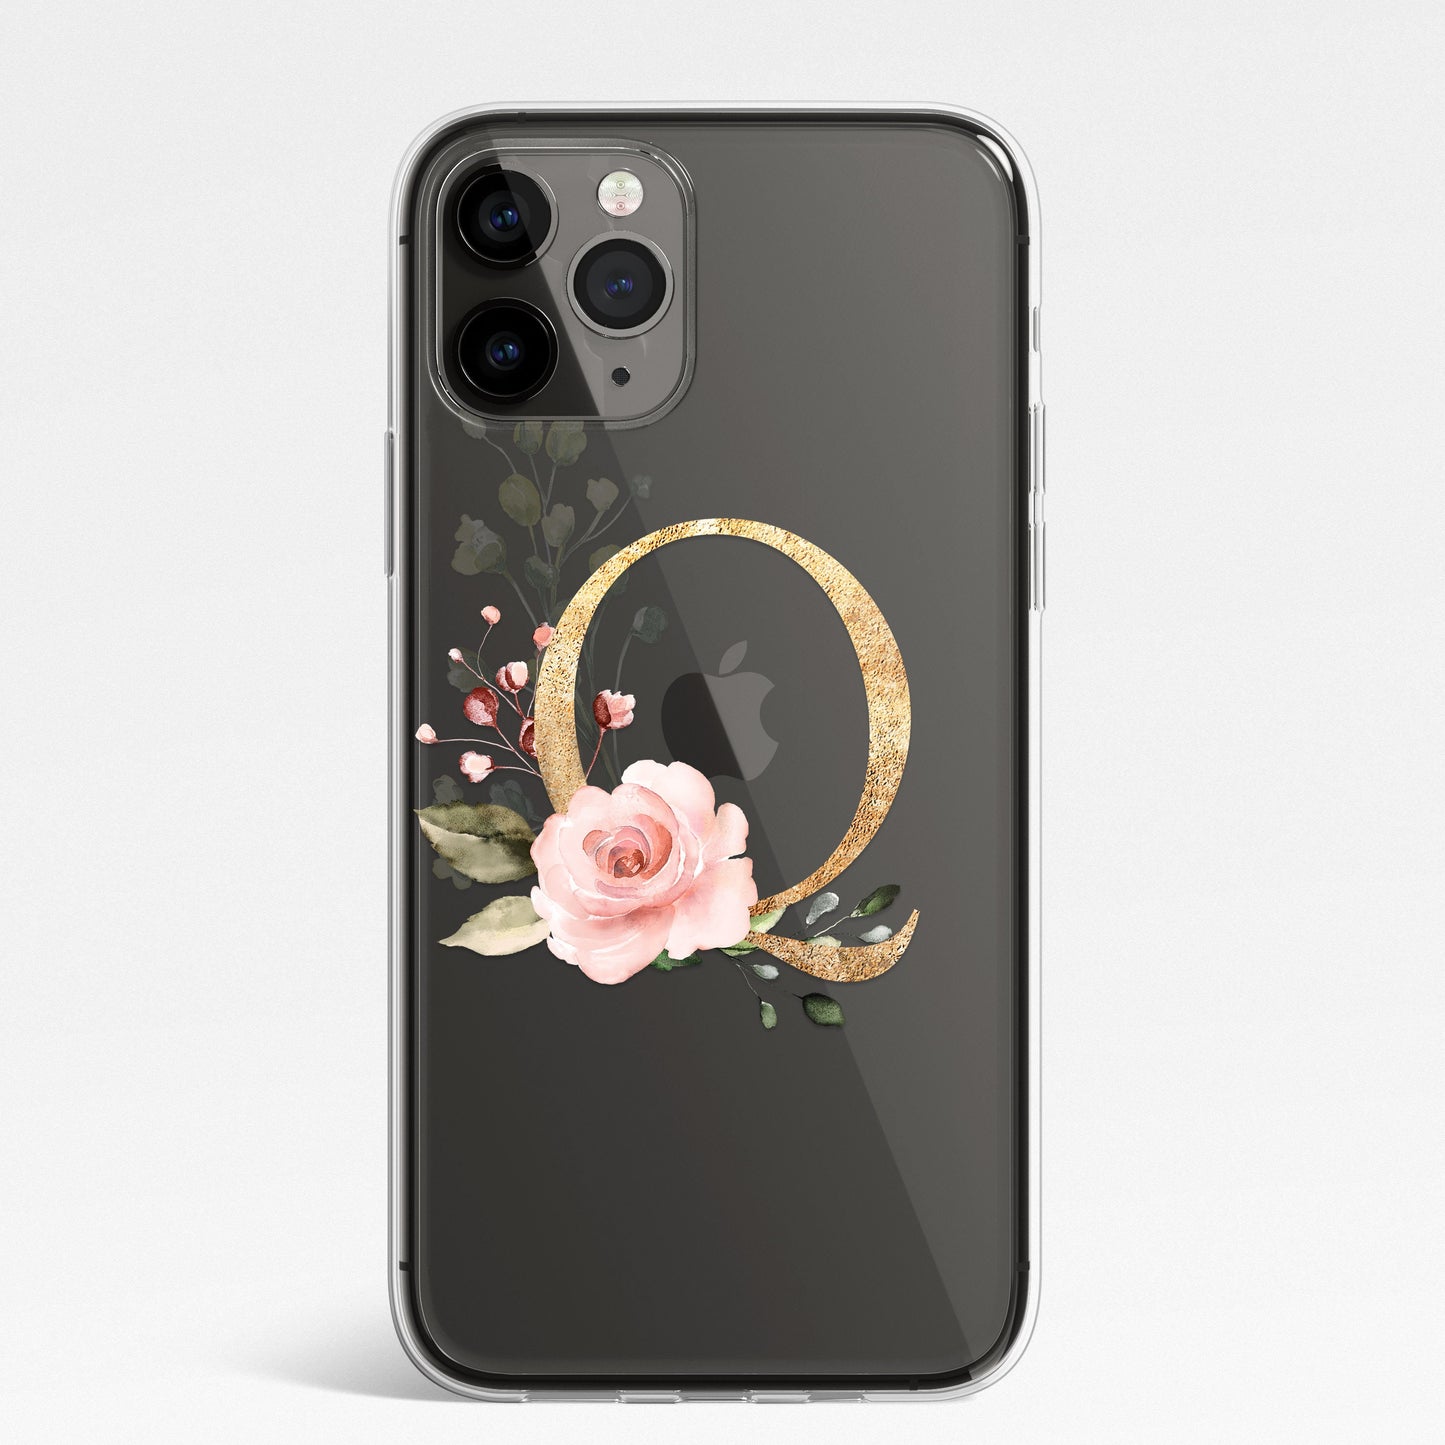 Personalised Monogram Custom Silicone CLEAR Phone Case Cover Floral Flowers English Roses Gold iPhone 11 XS XR Max Plus Pro Samsung Galaxy